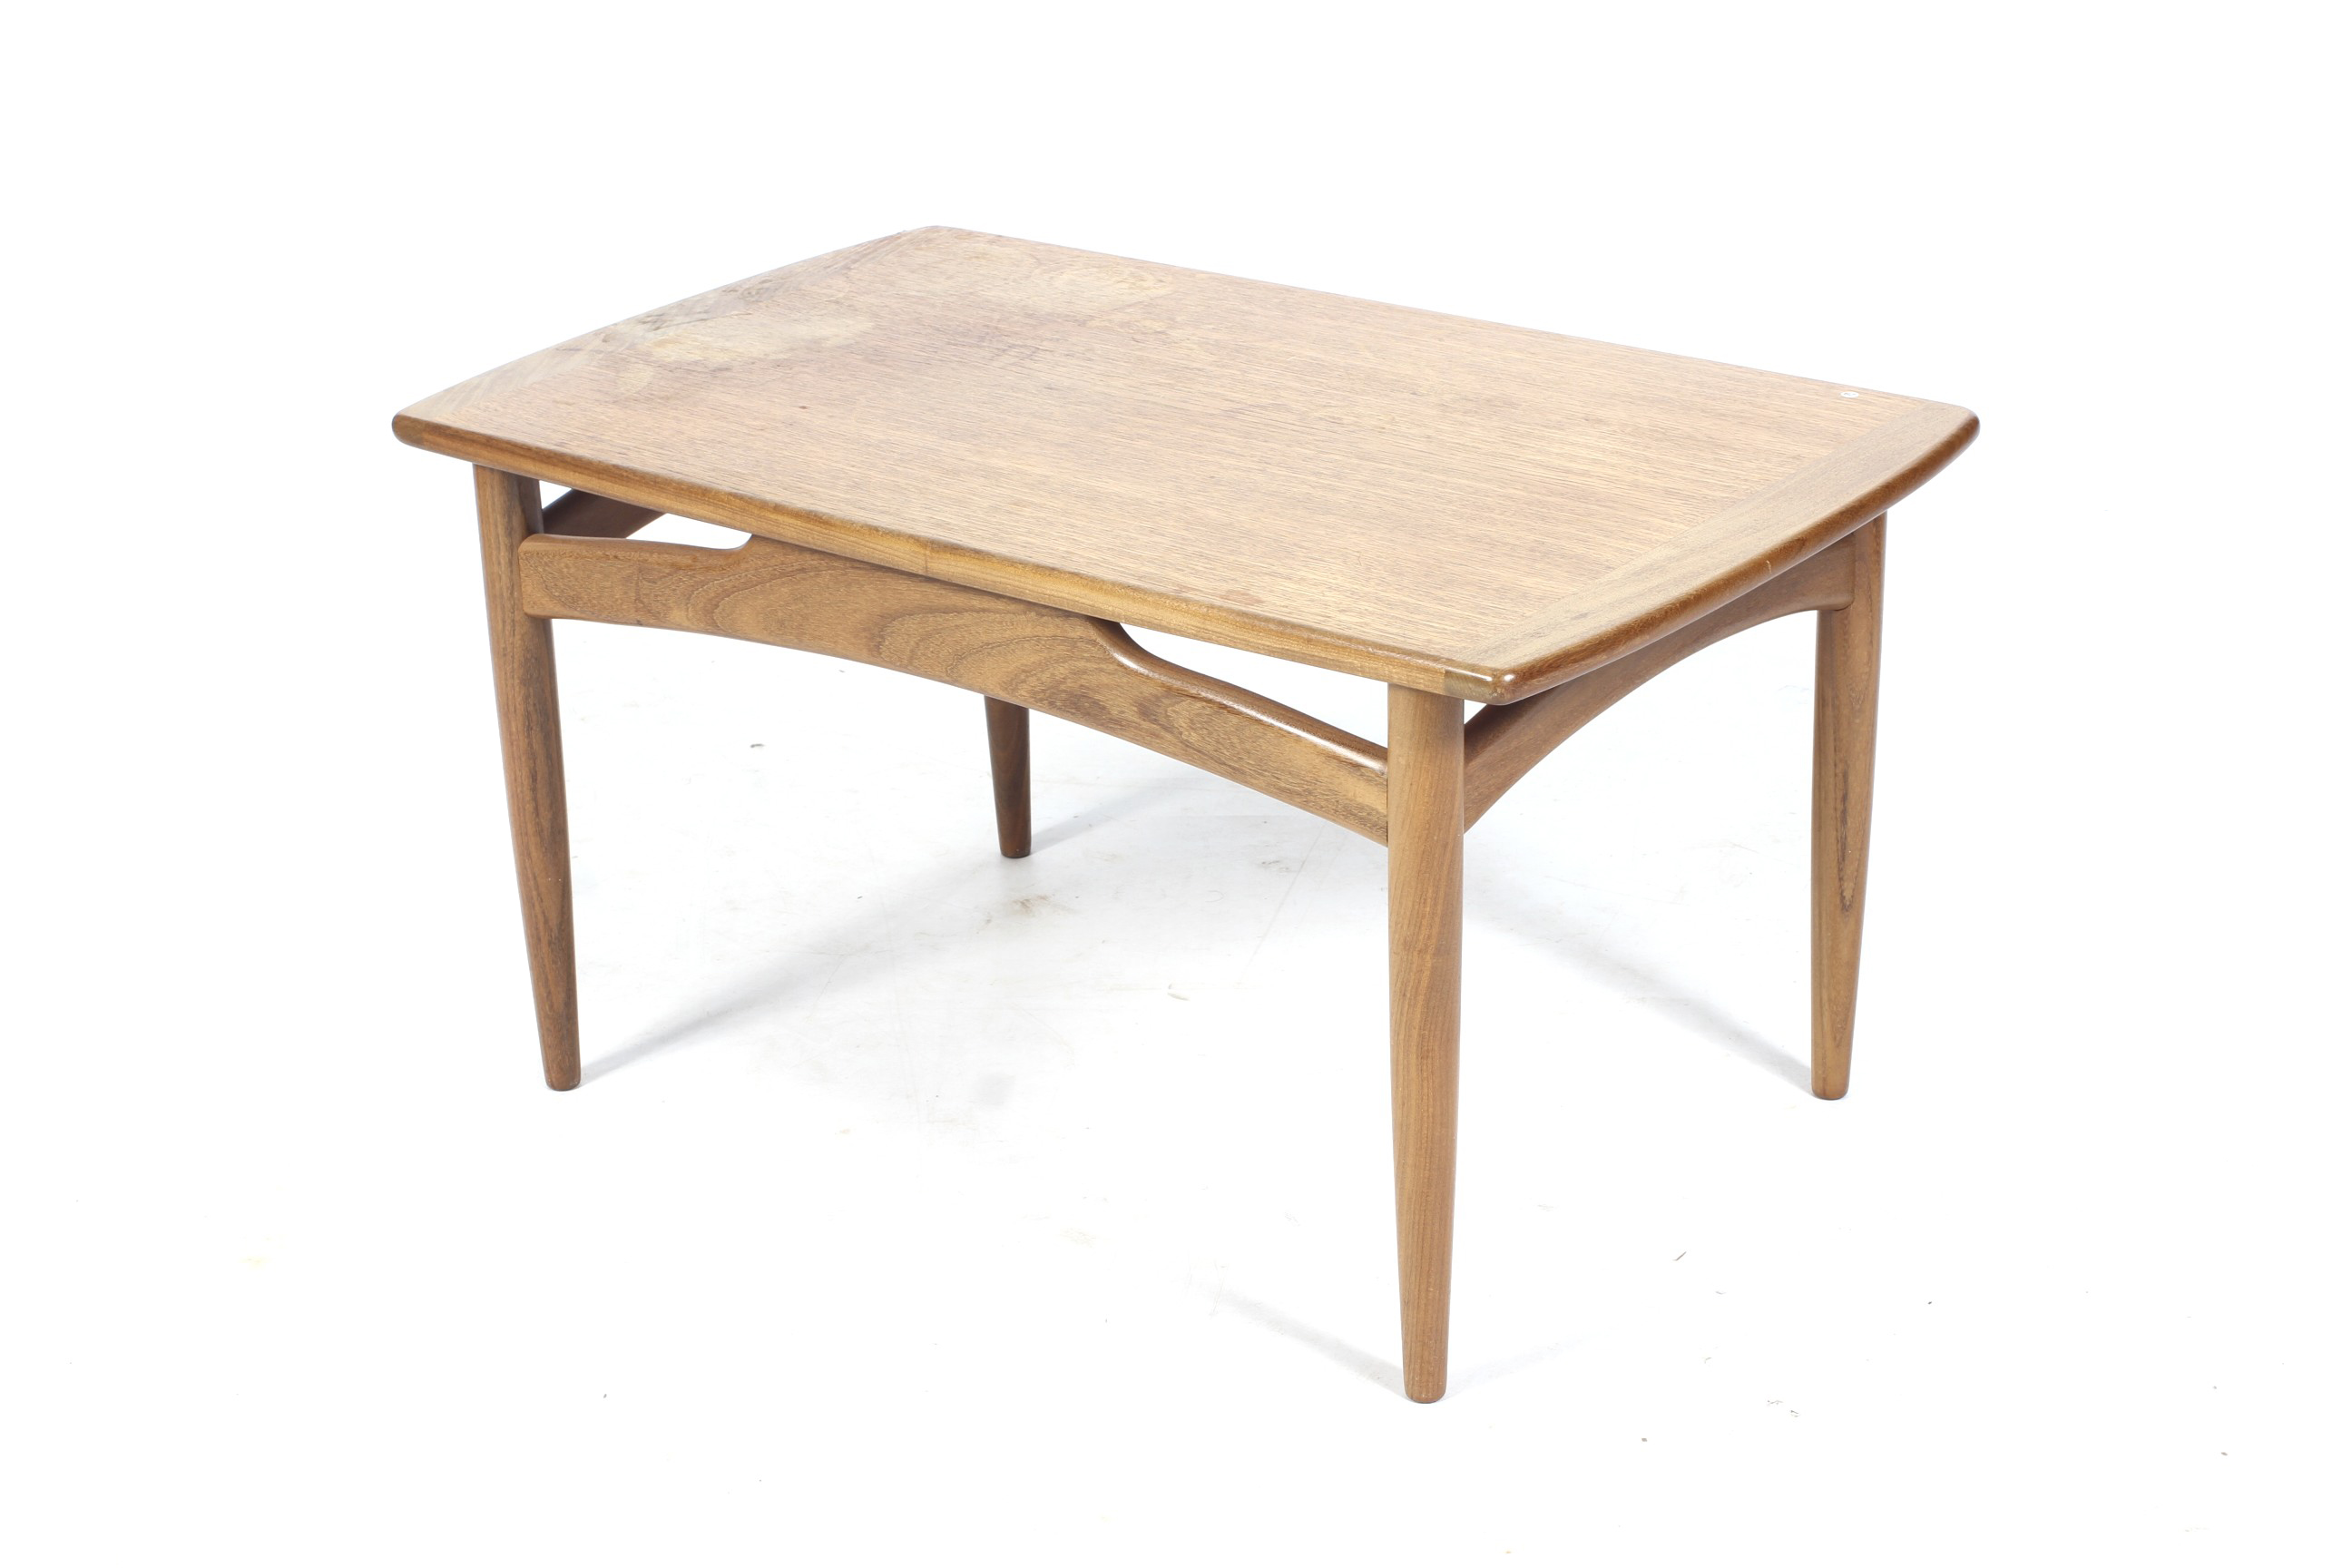 A 1960s period G-Plan Fresco teak coffee table. By designer Donald Gomme, red label on underside.